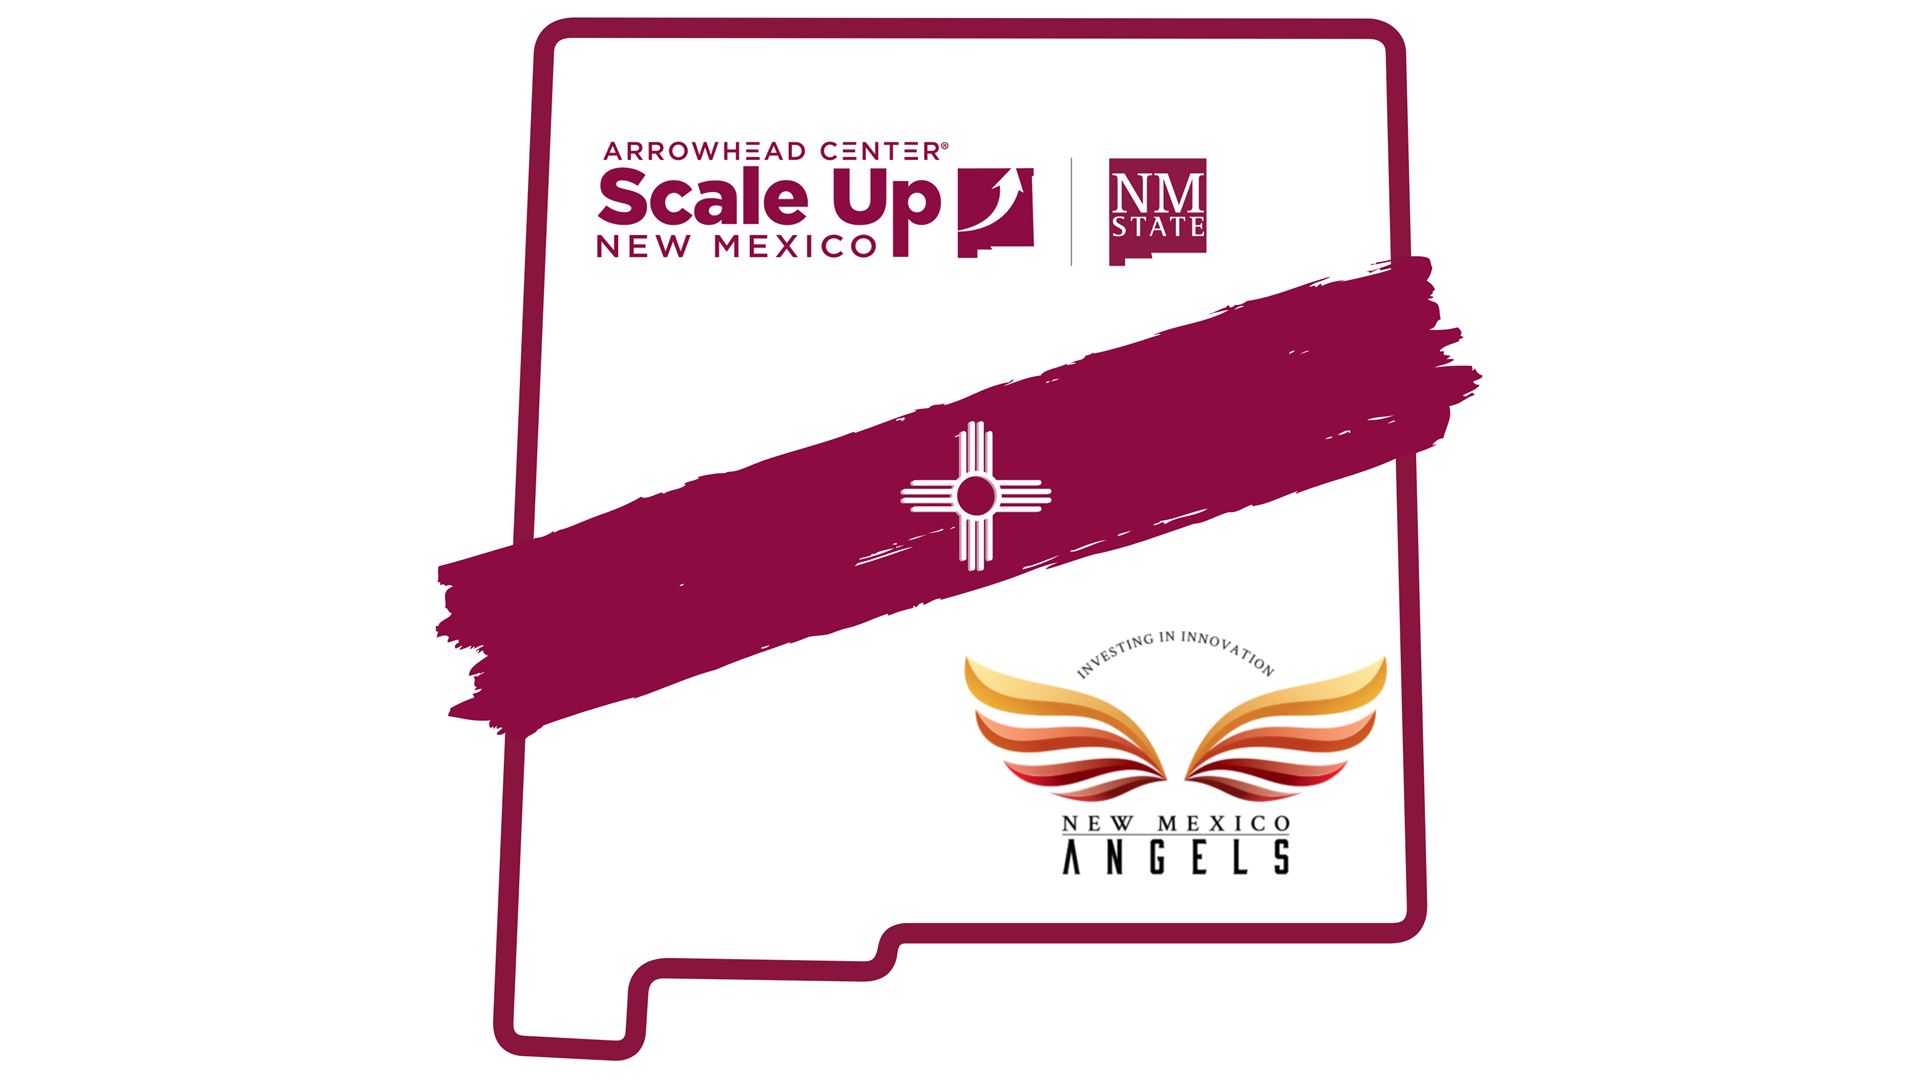 Scale Up NM NM Angels